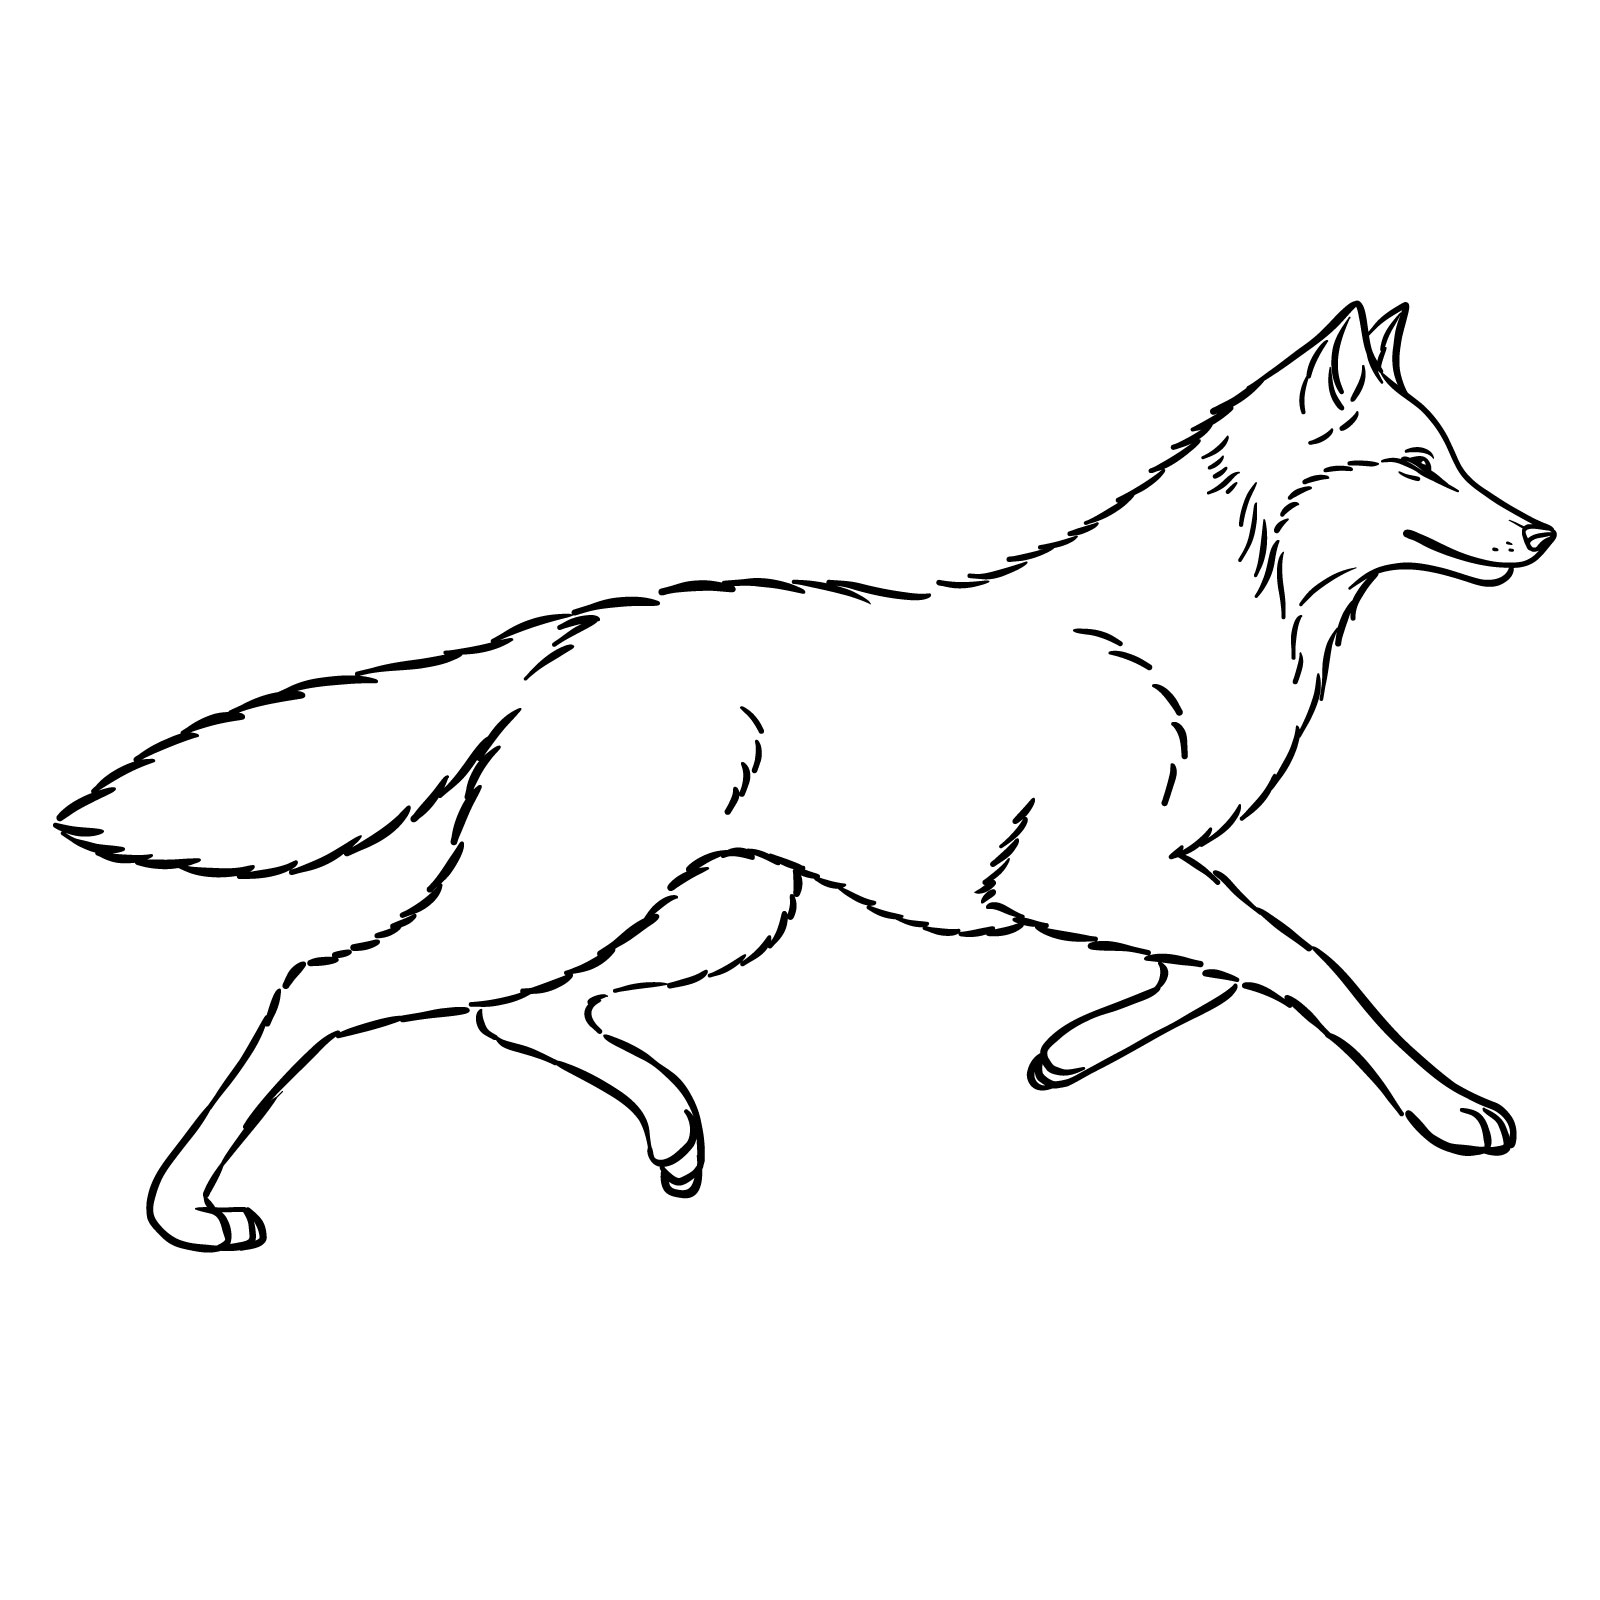 Finalized drawing of a running wolf after erasing the sketch lines - step 12